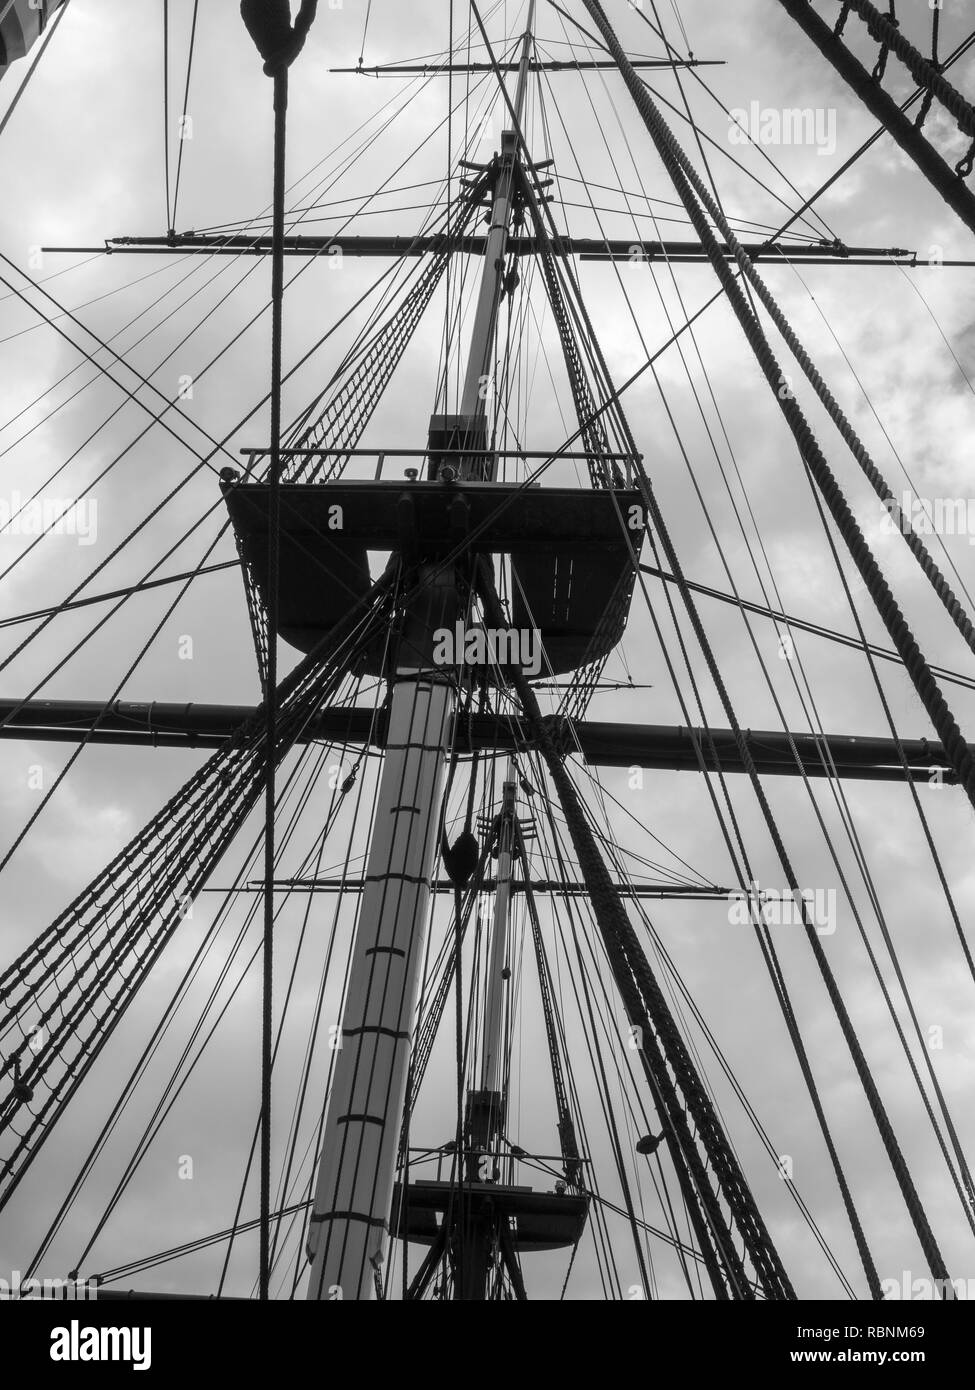 HMS Trincomalee, National Museum of The Royal Navy, Hartlepool, County Durham, England, UK - view of mast and rigging. Stock Photo